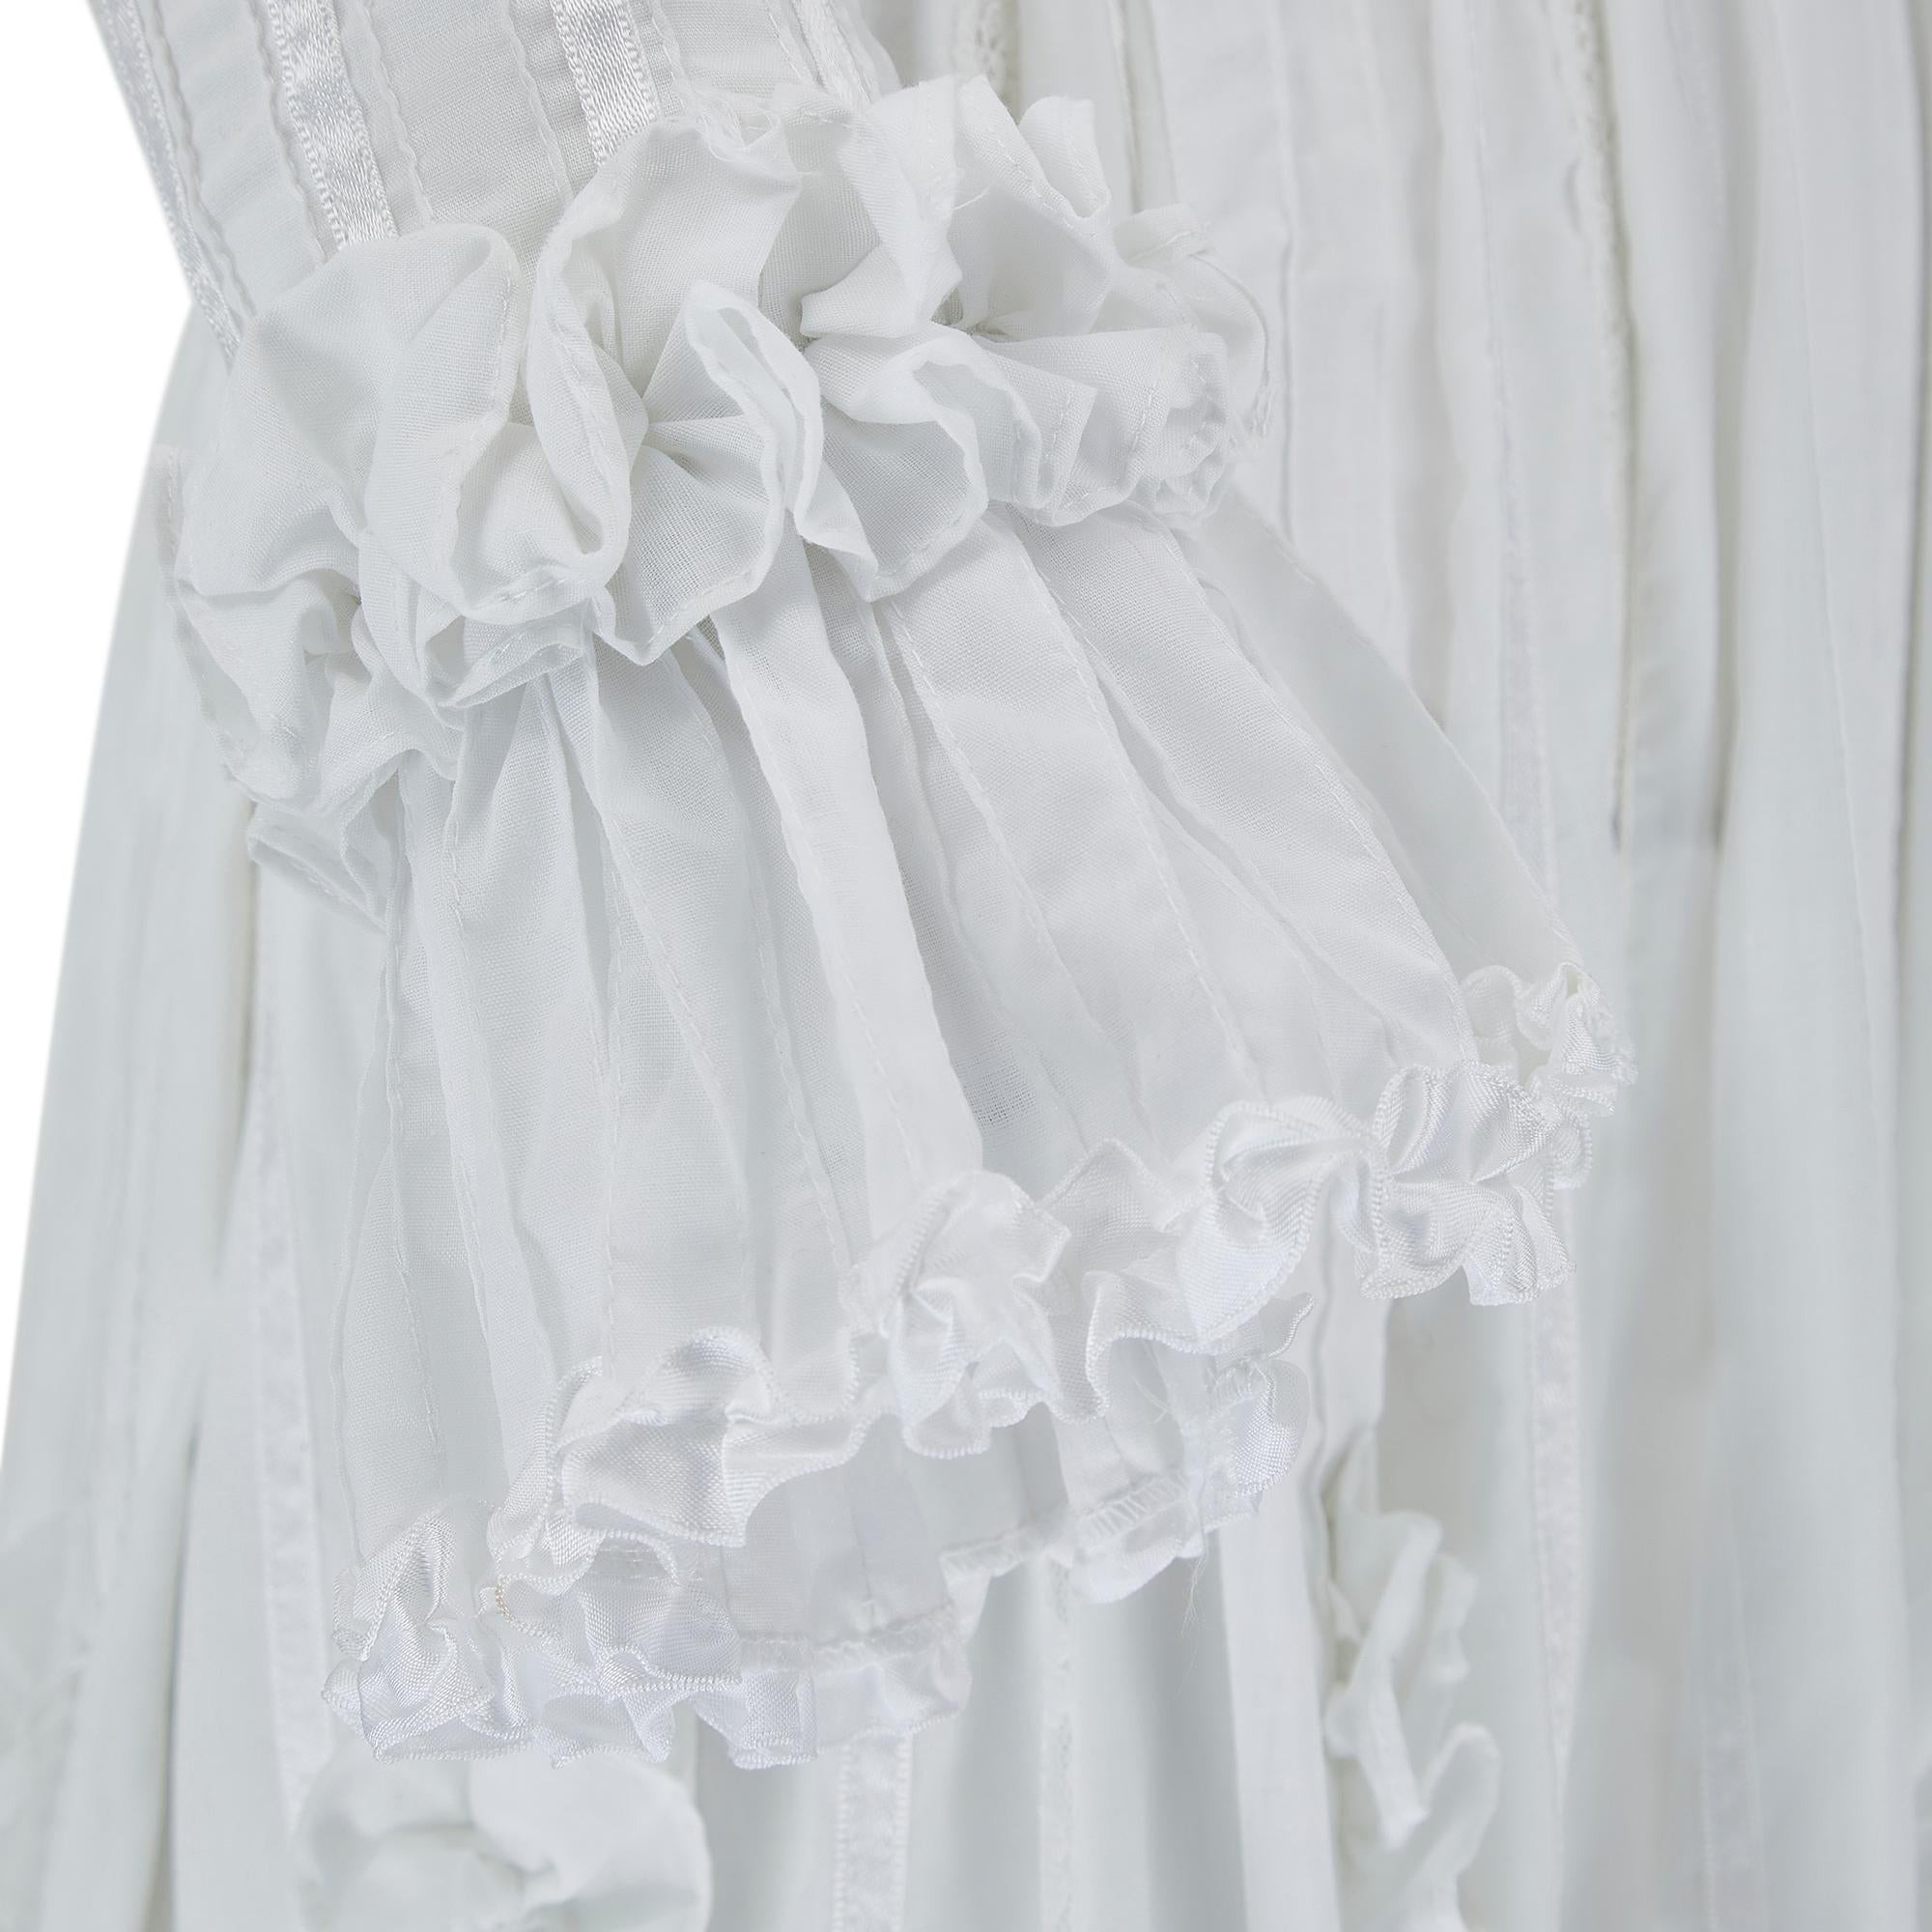 Women's 1970s Mexicana White Cotton and Lace Wedding Dress For Sale